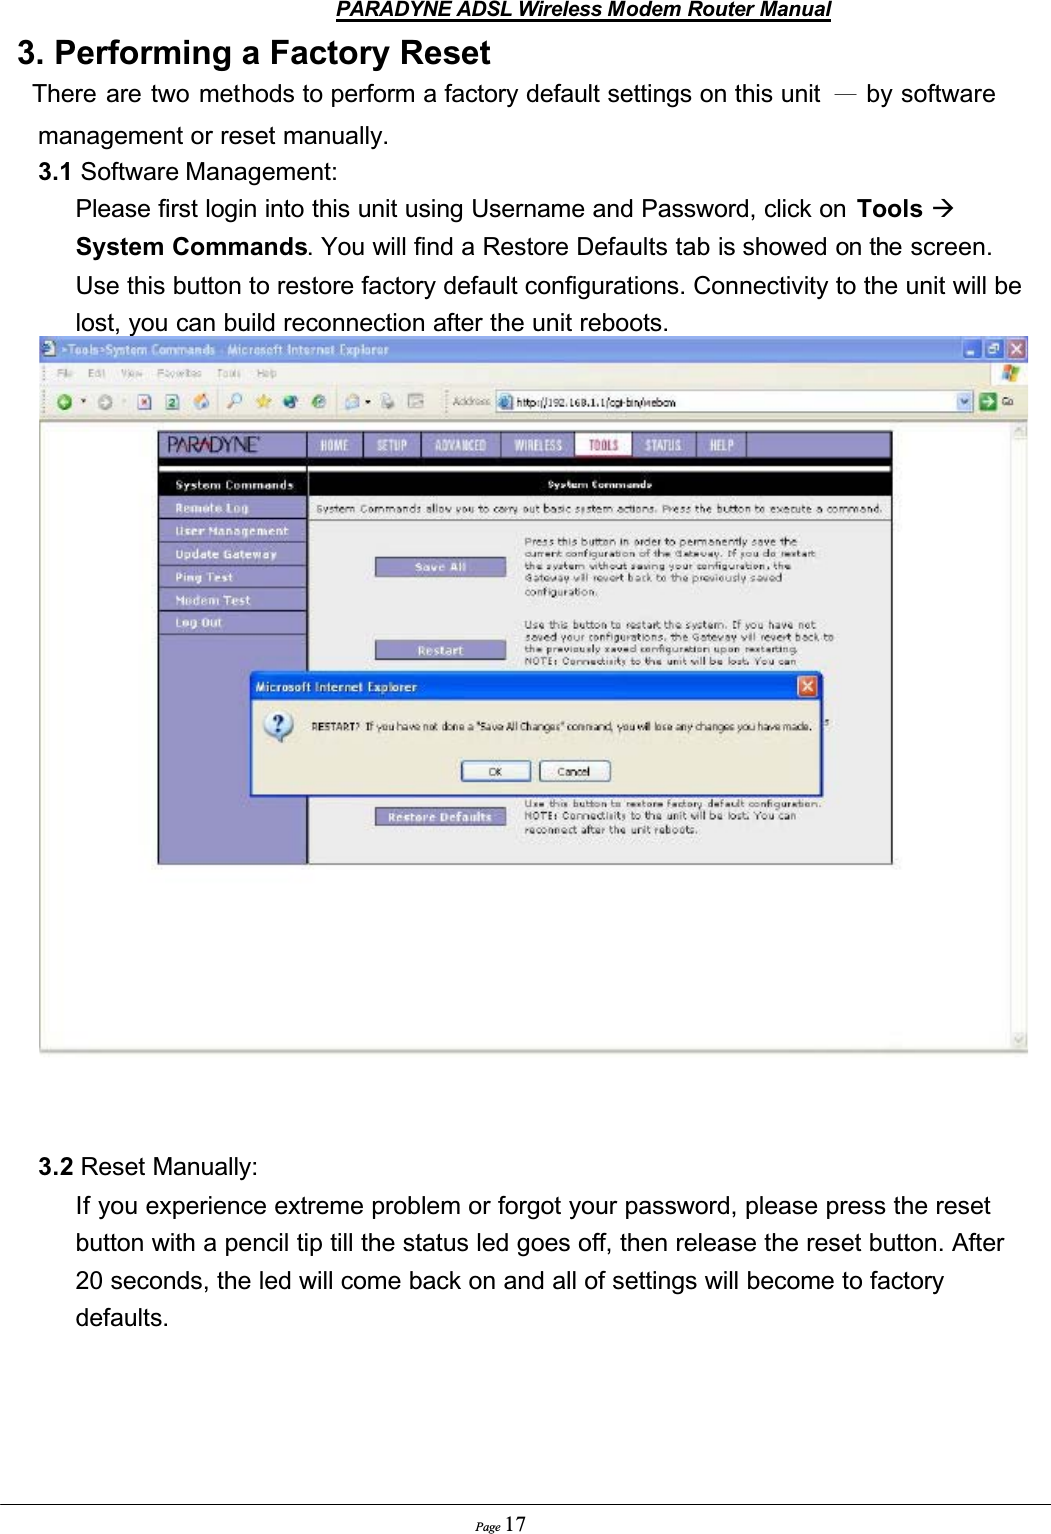 PARADYNE ADSL Wireless Modem Router ManualPage 173. Performing a Factory Reset  There are two methods to perform a factory default settings on this unit  Ϋ by software management or reset manually. 3.1 Software Management:          Please first login into this unit using Username and Password, click on  Tools ÆSystem Commands. You will find a Restore Defaults tab is showed on the screen. Use this button to restore factory default configurations. Connectivity to the unit will be lost, you can build reconnection after the unit reboots.3.2 Reset Manually:          If you experience extreme problem or forgot your password, please press the reset button with a pencil tip till the status led goes off, then release the reset button. After 20 seconds, the led will come back on and all of settings will become to factory defaults.